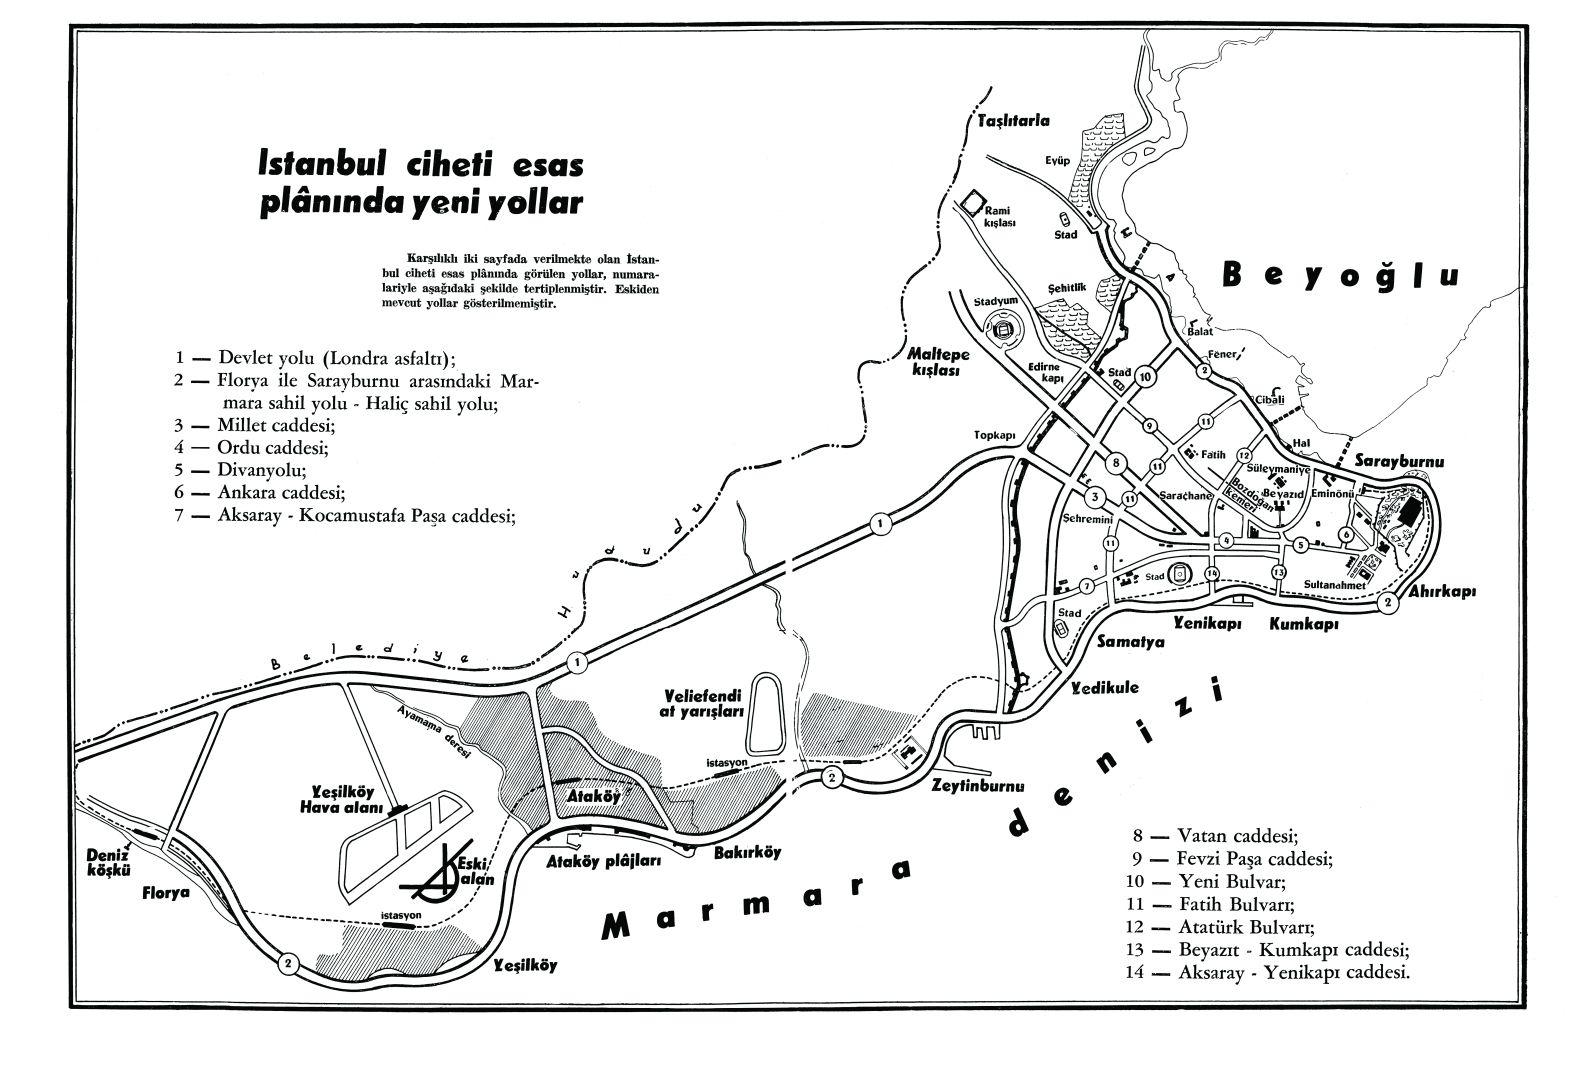 24- New Road Plan of Istanbul during the period of Adnan Menderes (<em>İstanbul’un Kitabı</em>)